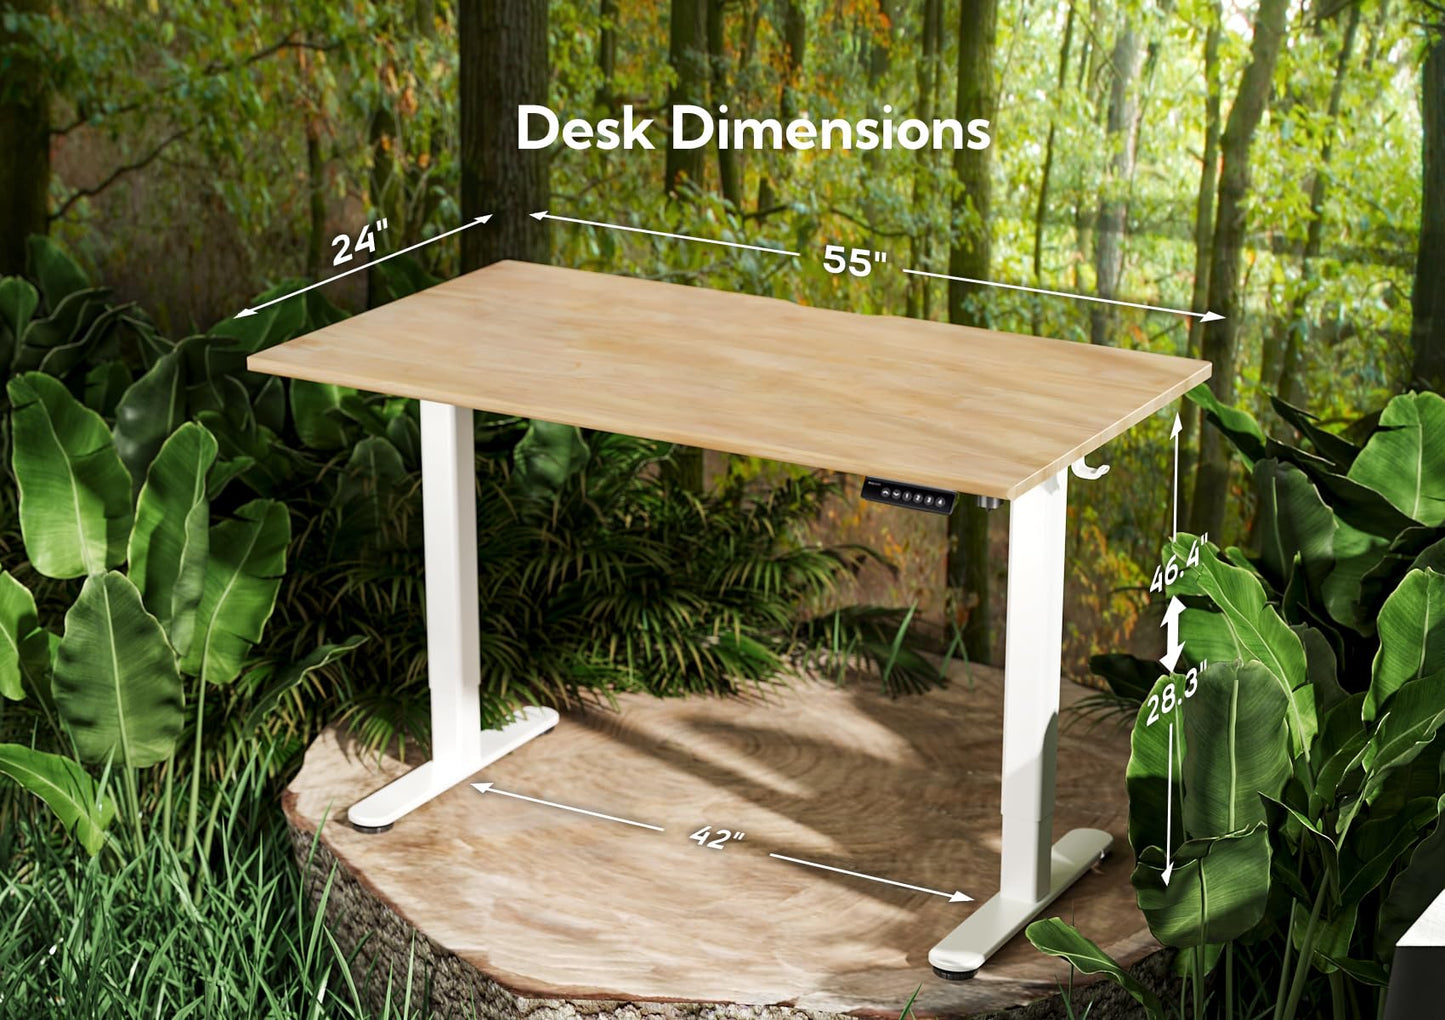 INNOVAR Solid Wood Electric Standing Desk, 55x24 Inches Adjustable Height Stand up Desk with Whole Piece Desktop, Sit Stand Home Office Desk White Frame/Nature Top